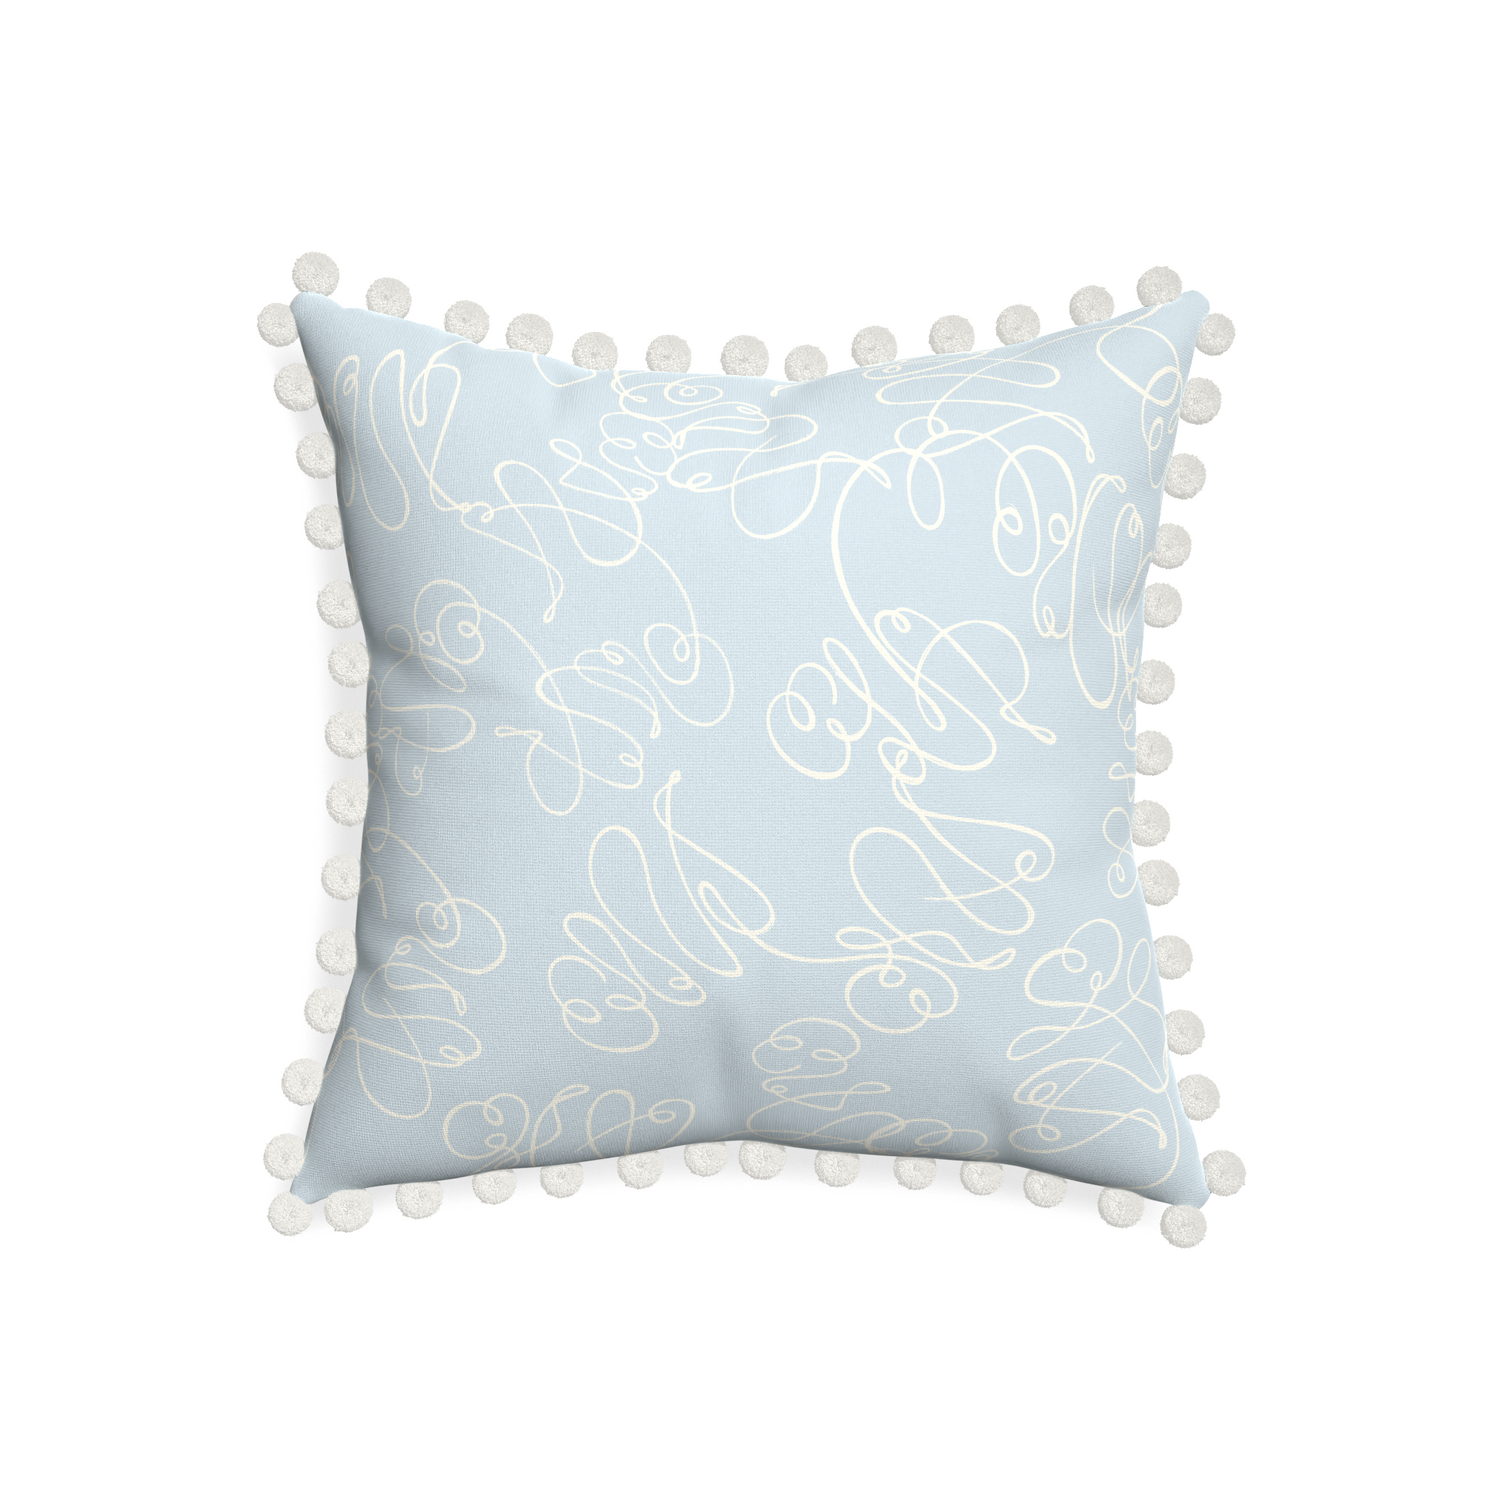 20-square mirabella custom powder blue abstractpillow with snow pom pom on white background